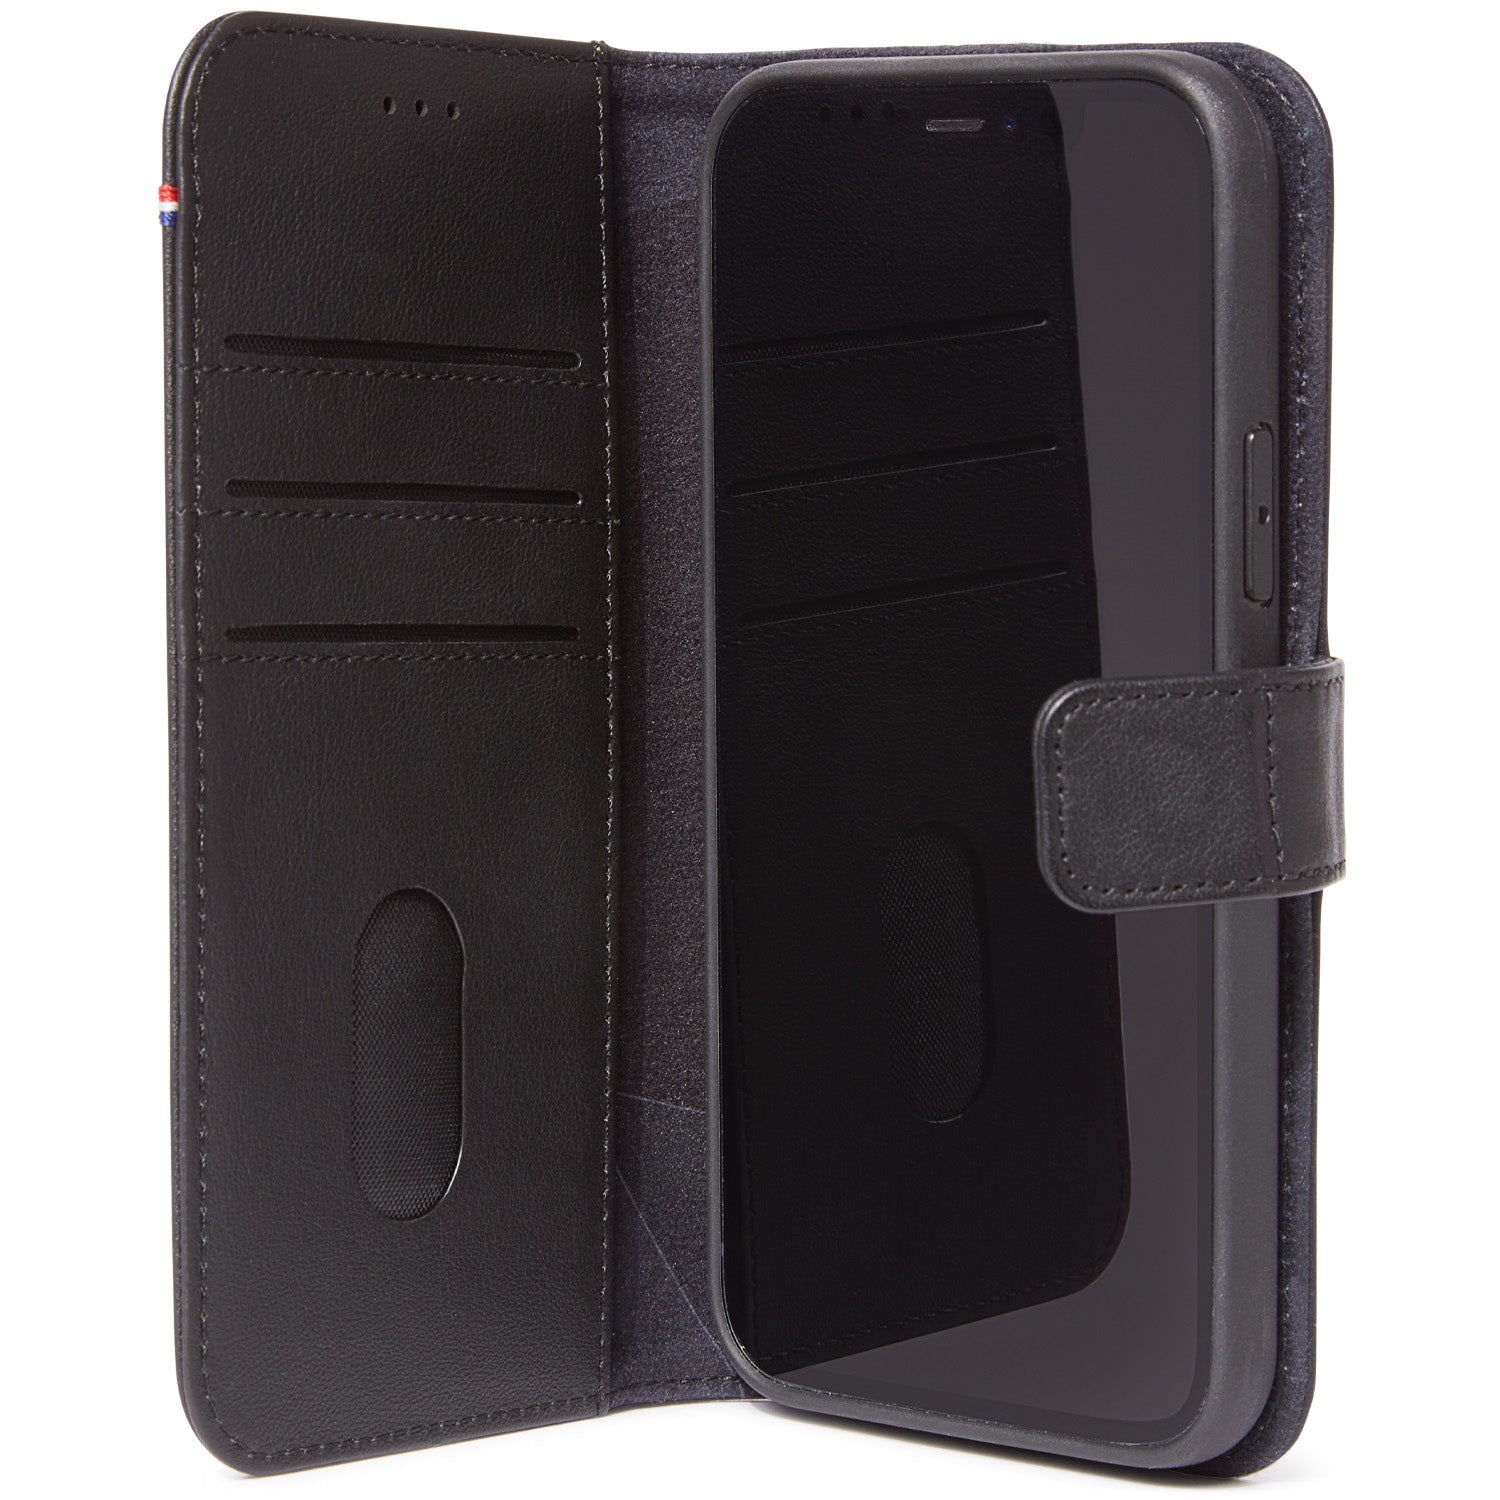 DECODED Leather Detachable Wallet, Black